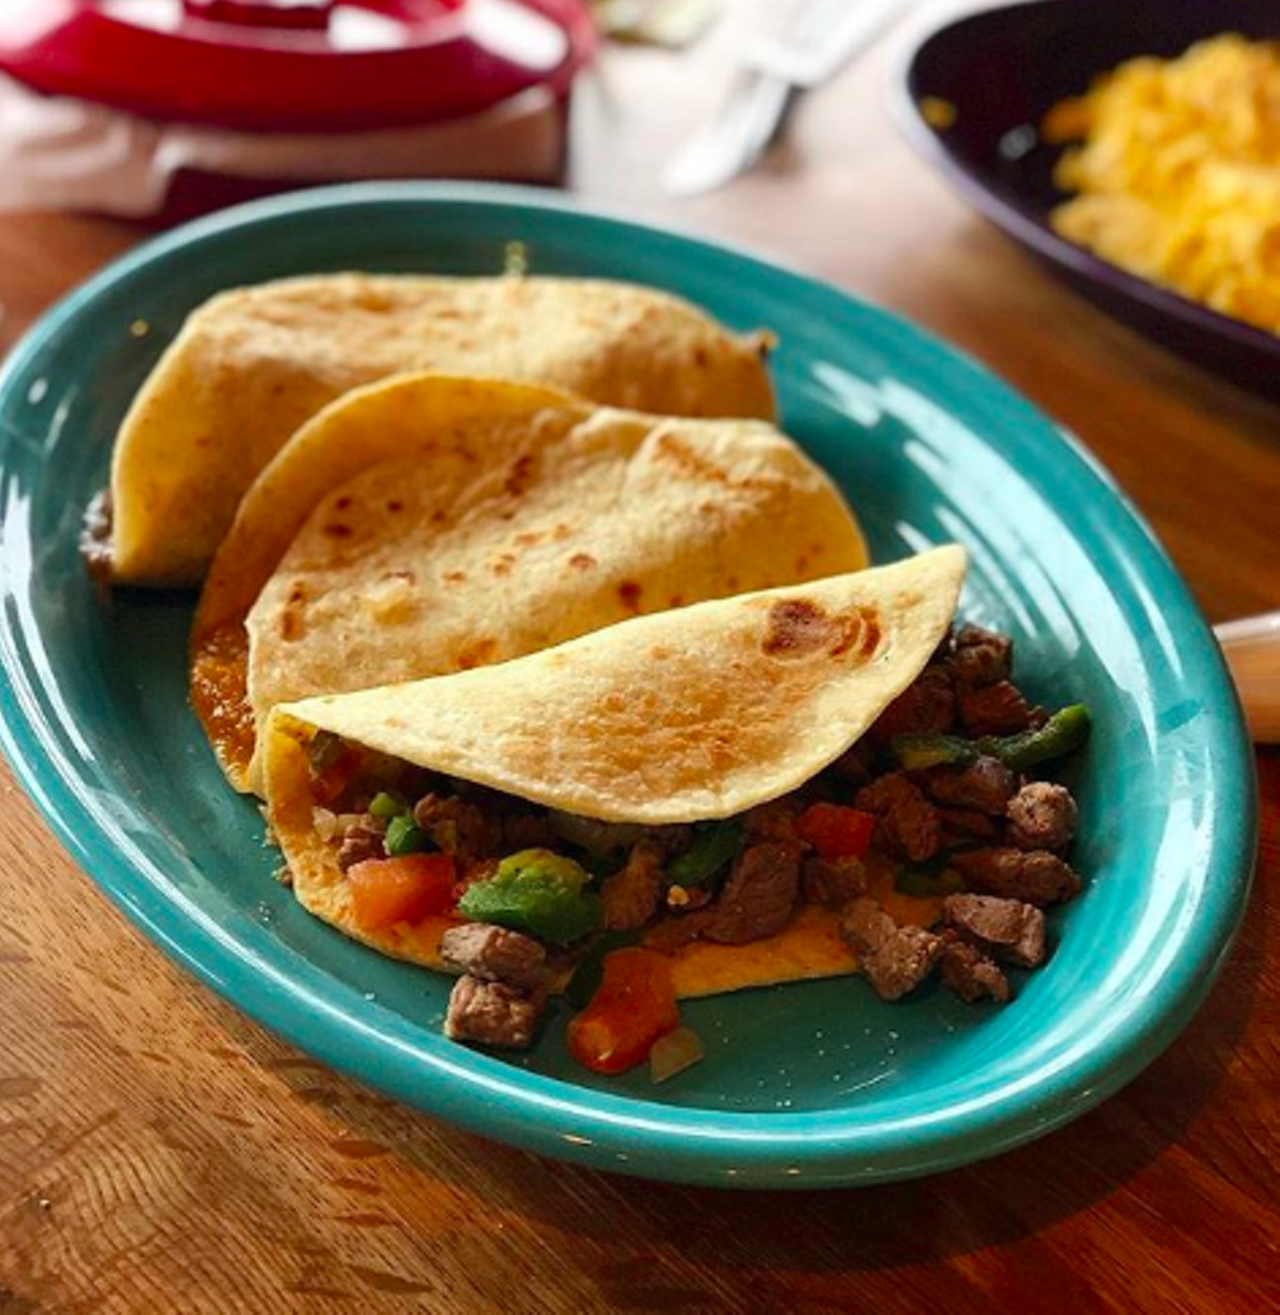 Sarita’s Mexican Restaurant
Multiple locations, saritastexmex.com
With eighteen different breakfast taco choices and tasty lunch tacos, you’re sure to find something at Sarita’s when that taco craving hits. They’ve also got a great online ordering system, so you can order and enjoy approximately all the tacos from the privacy of your own home.
Photo via Instagram / markasoria